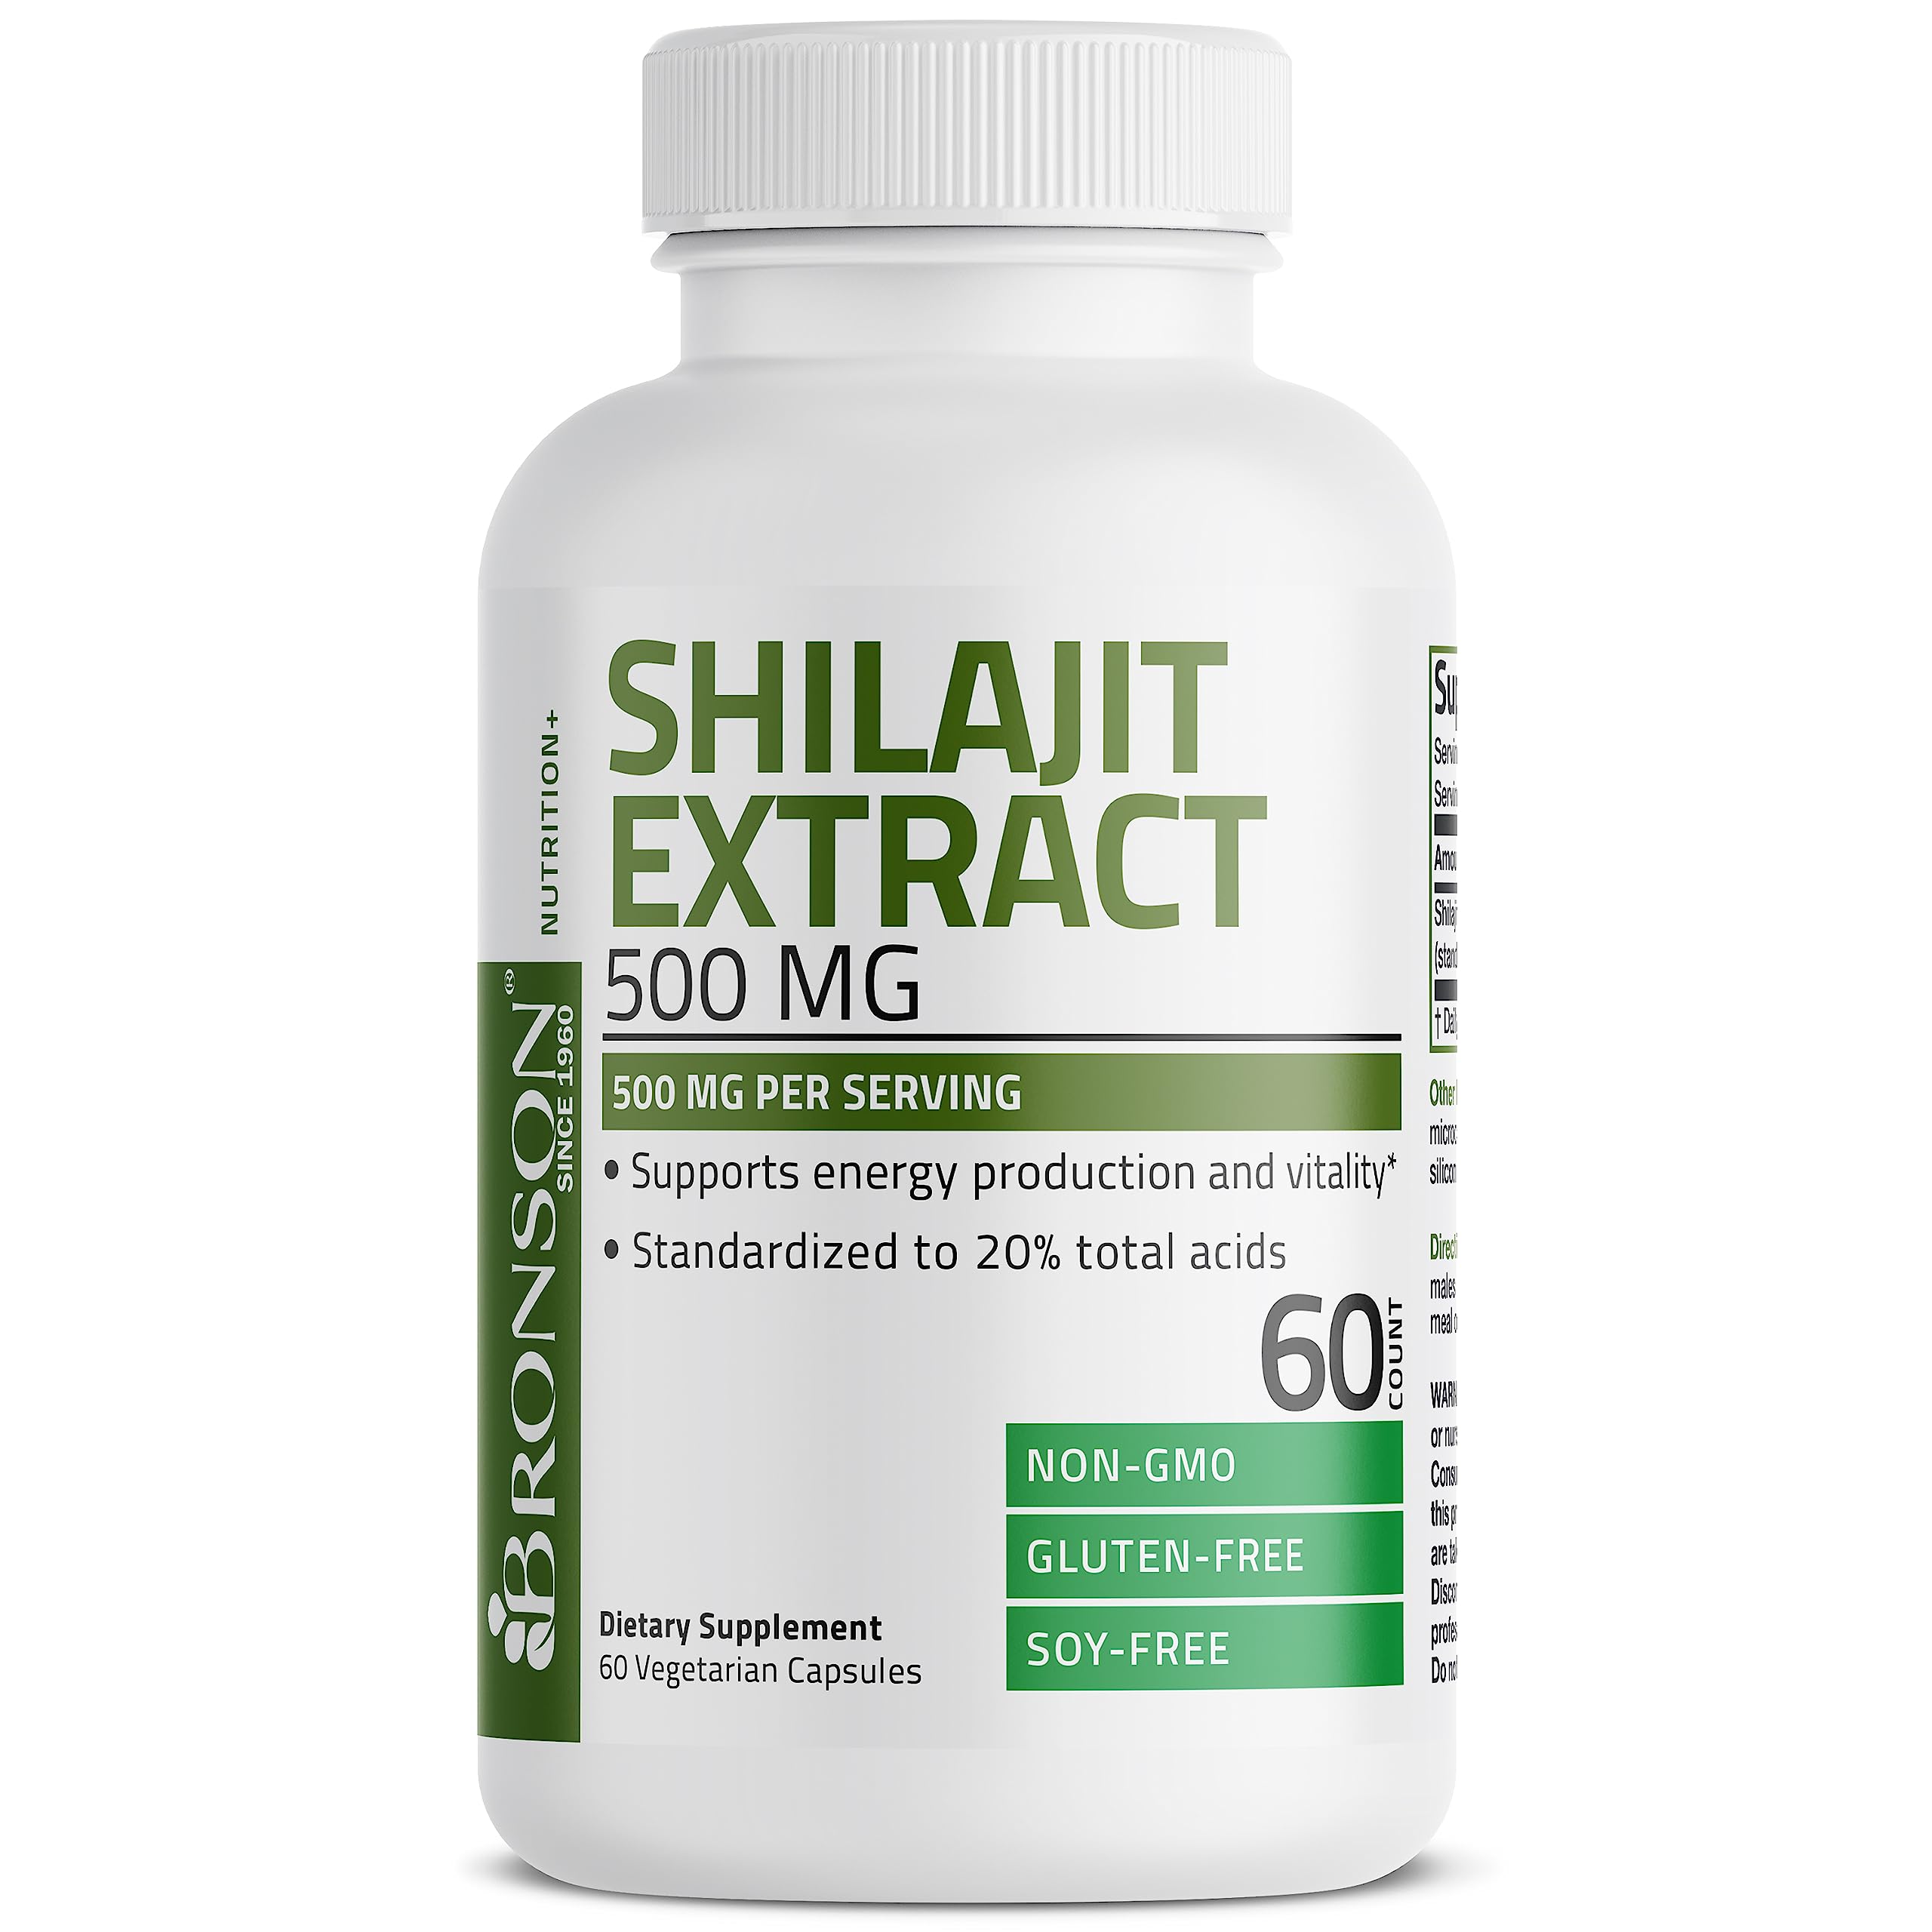 Shilajit Extract - 500 mg view 4 of 6